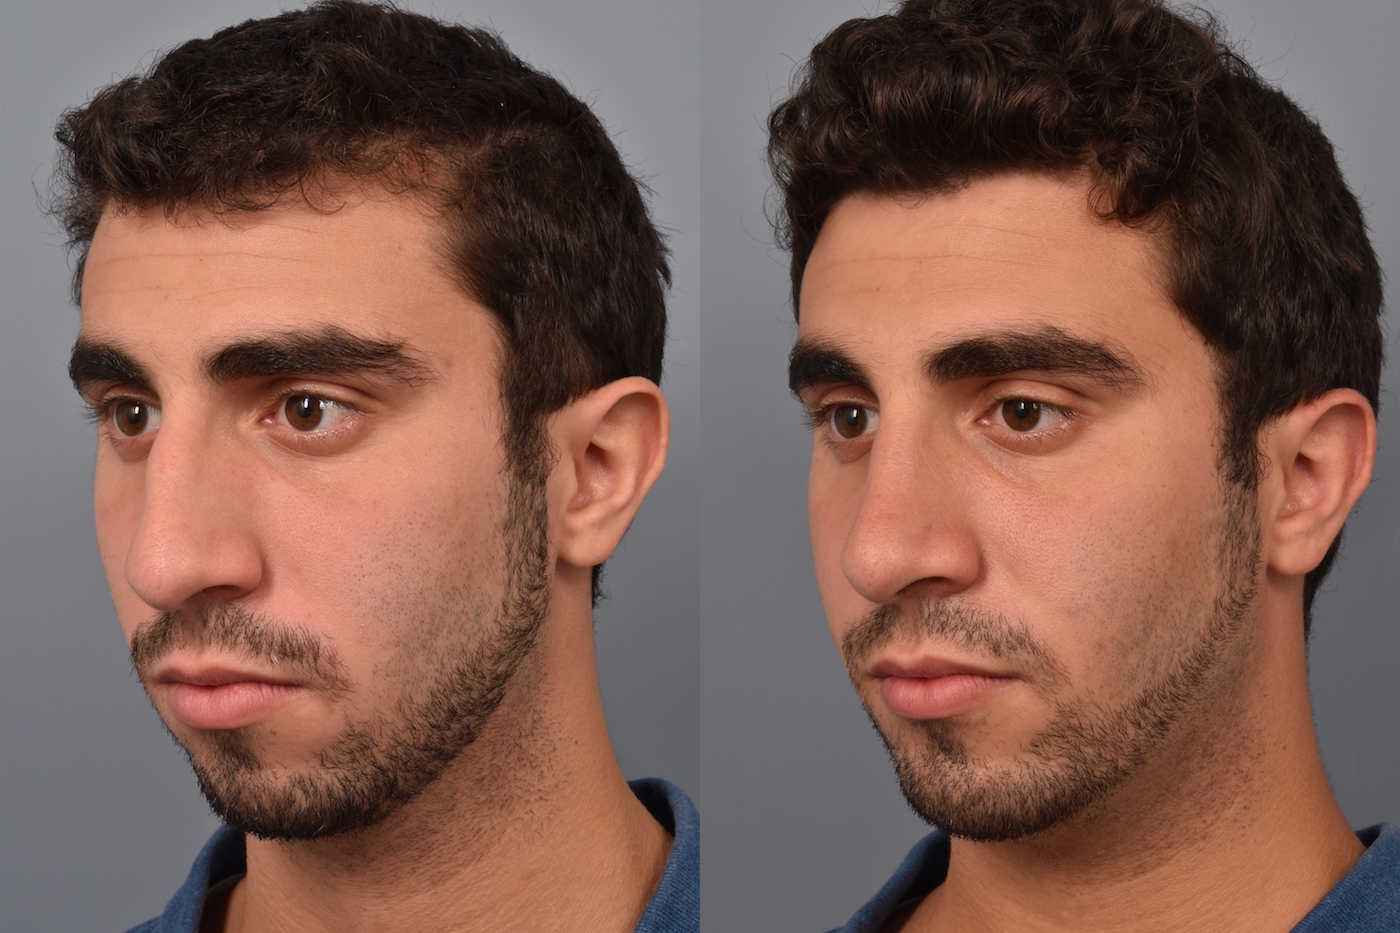 patient before and after rhinoplasty and chin implant